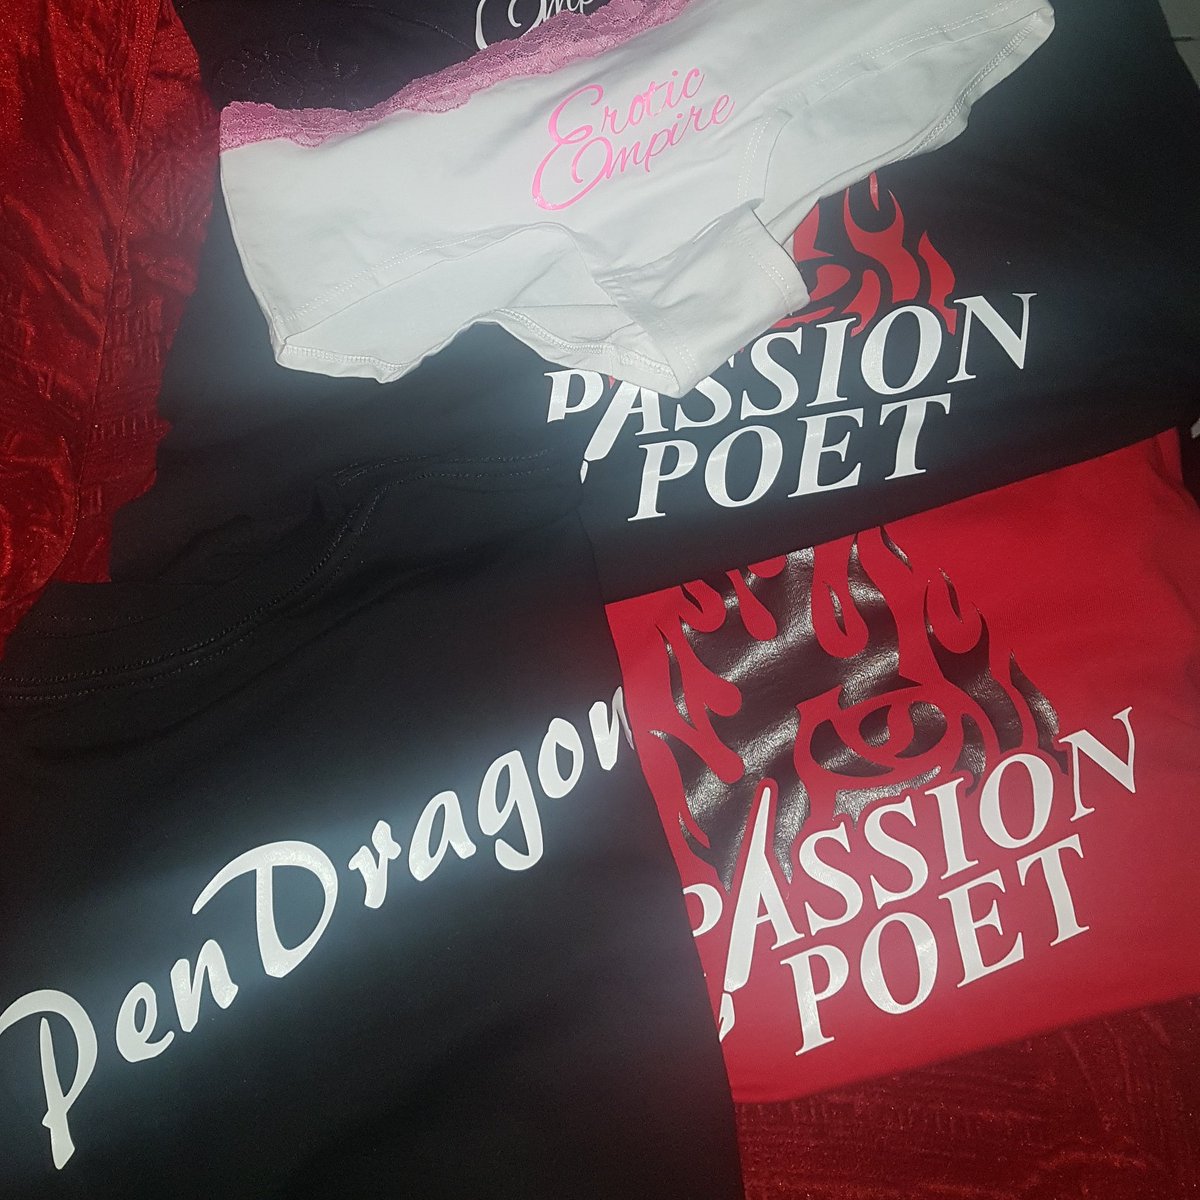 #EmpireSwag to ship out! Do you want to #SpreadTheEmpire? Get yours today!

#EroticEmpire #PassionPoet #swag #merch #Tshirts #Panties